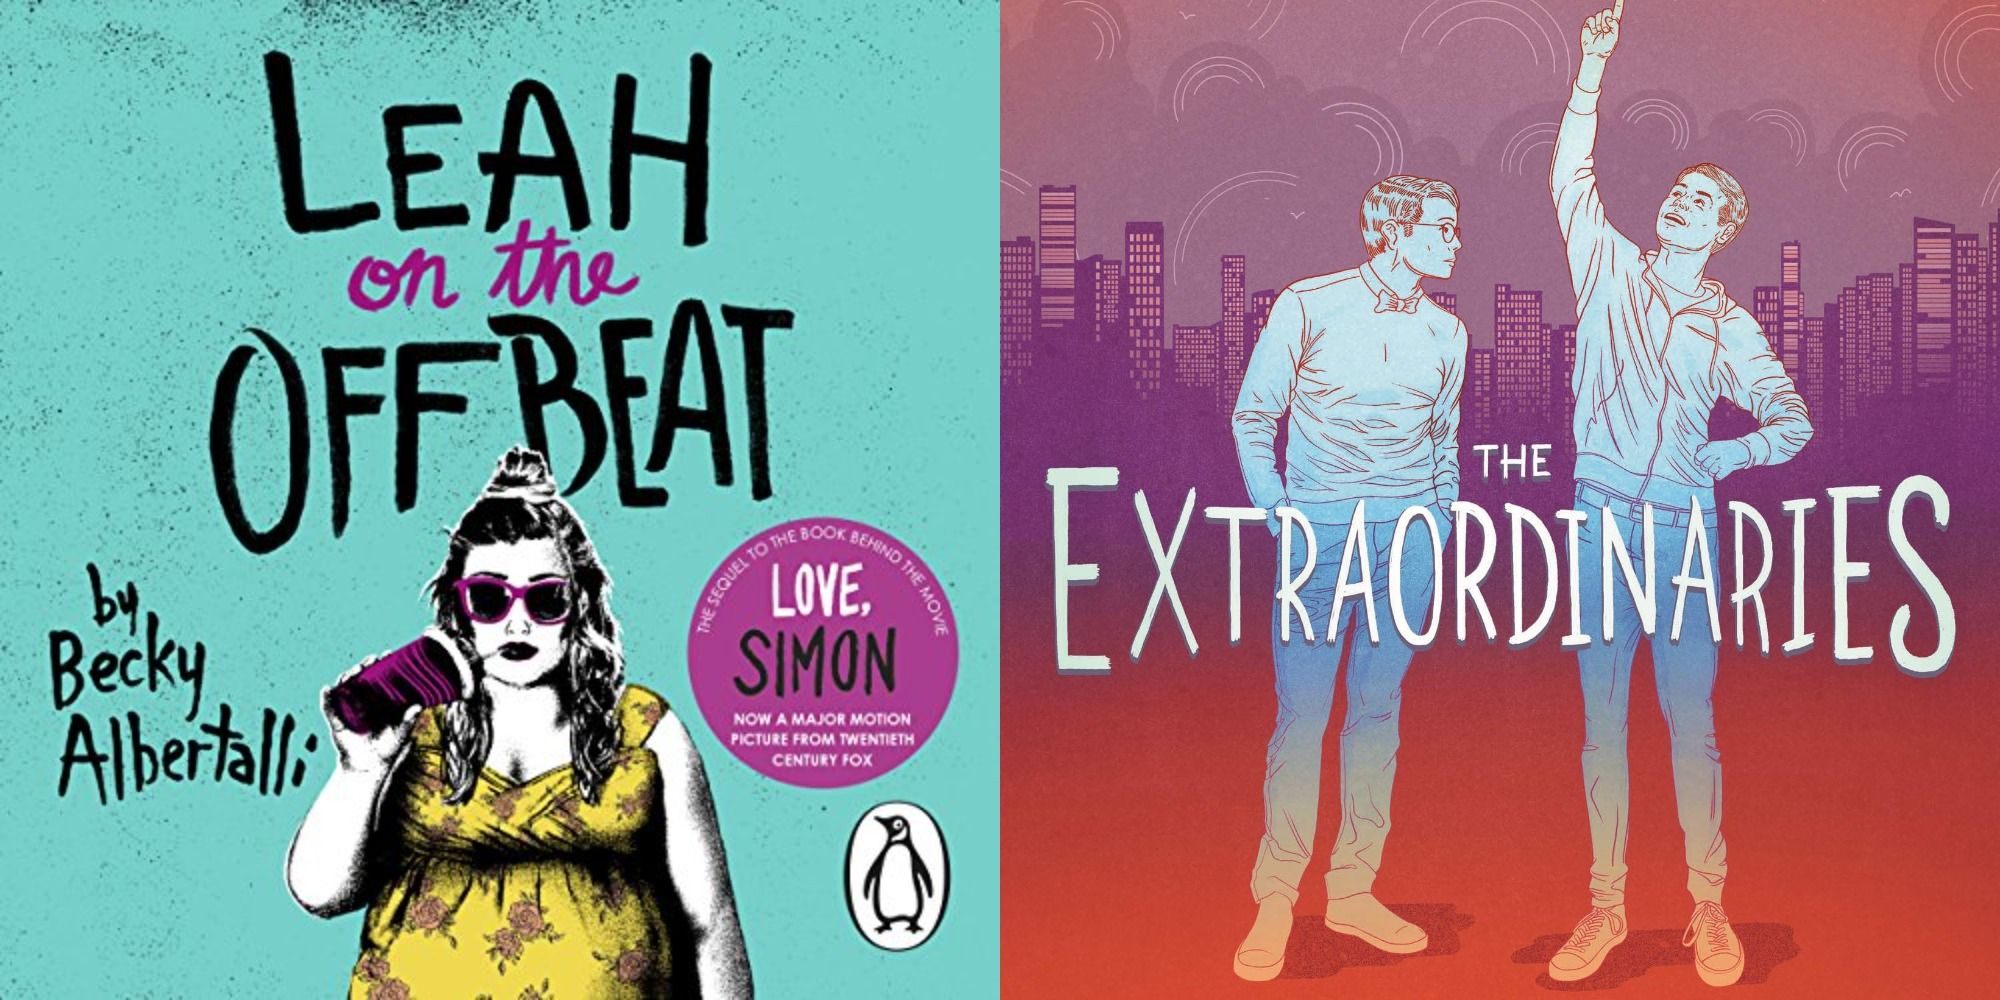 Split image showing the covers for Leah on the Offbeat and The Extraordinaries